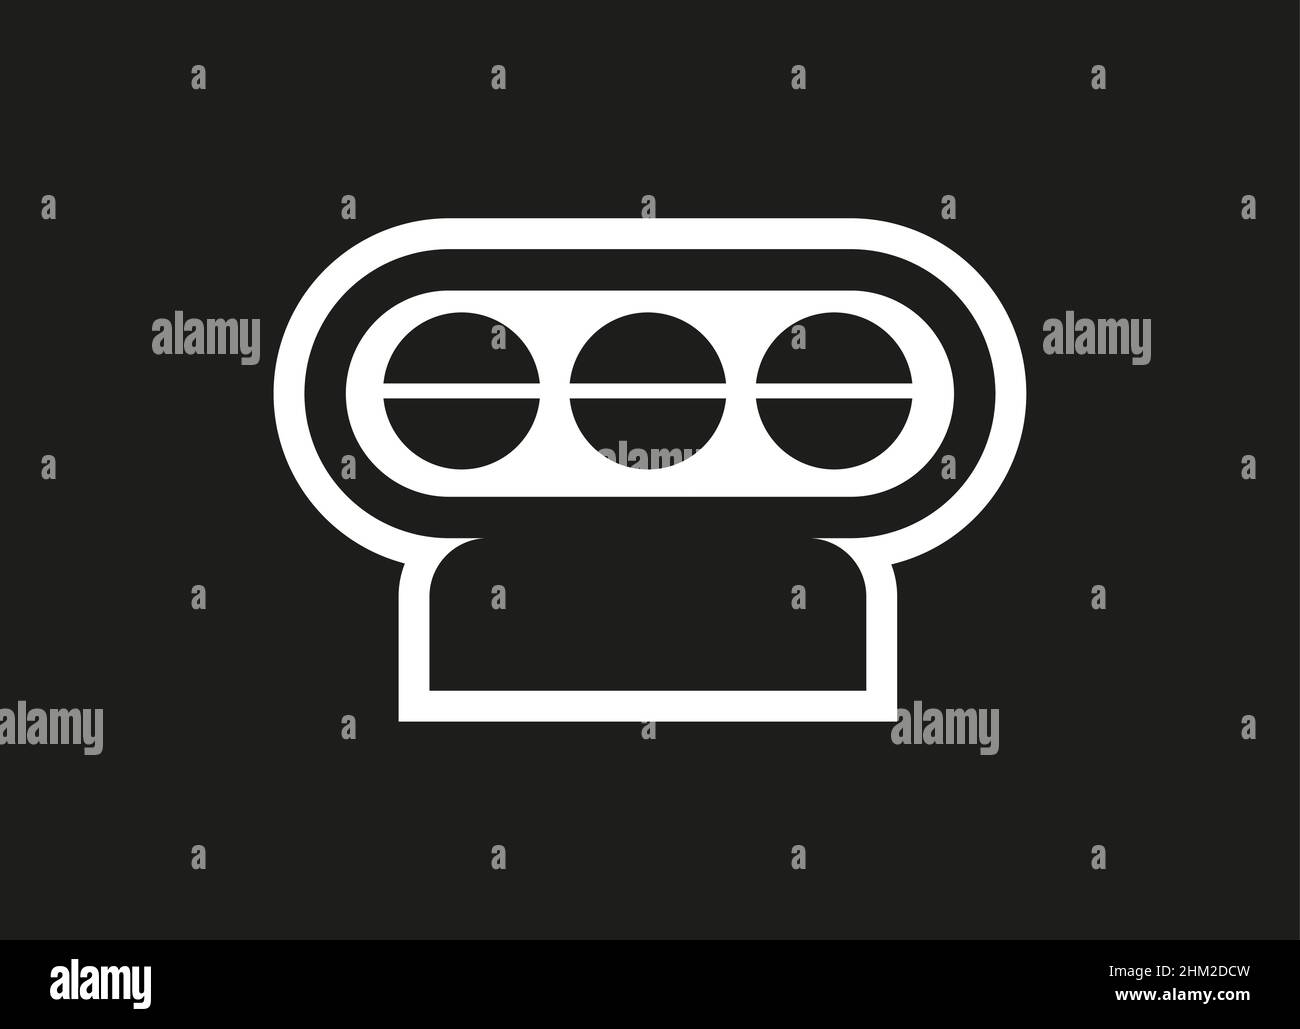 Super charger vector icon on black background Stock Vector